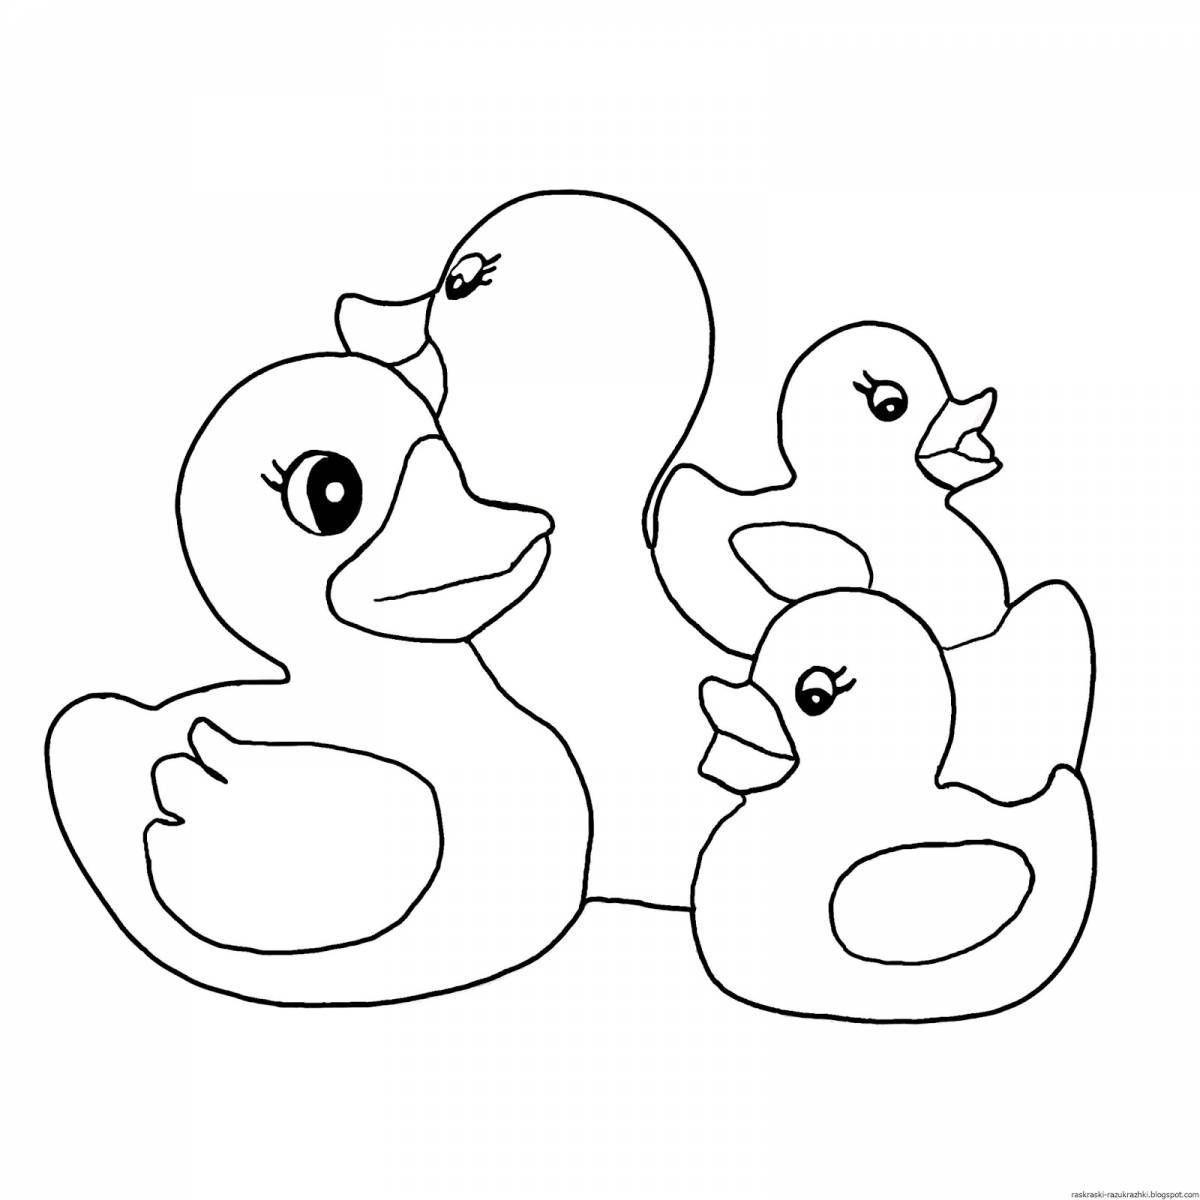 Quacking duck coloring book